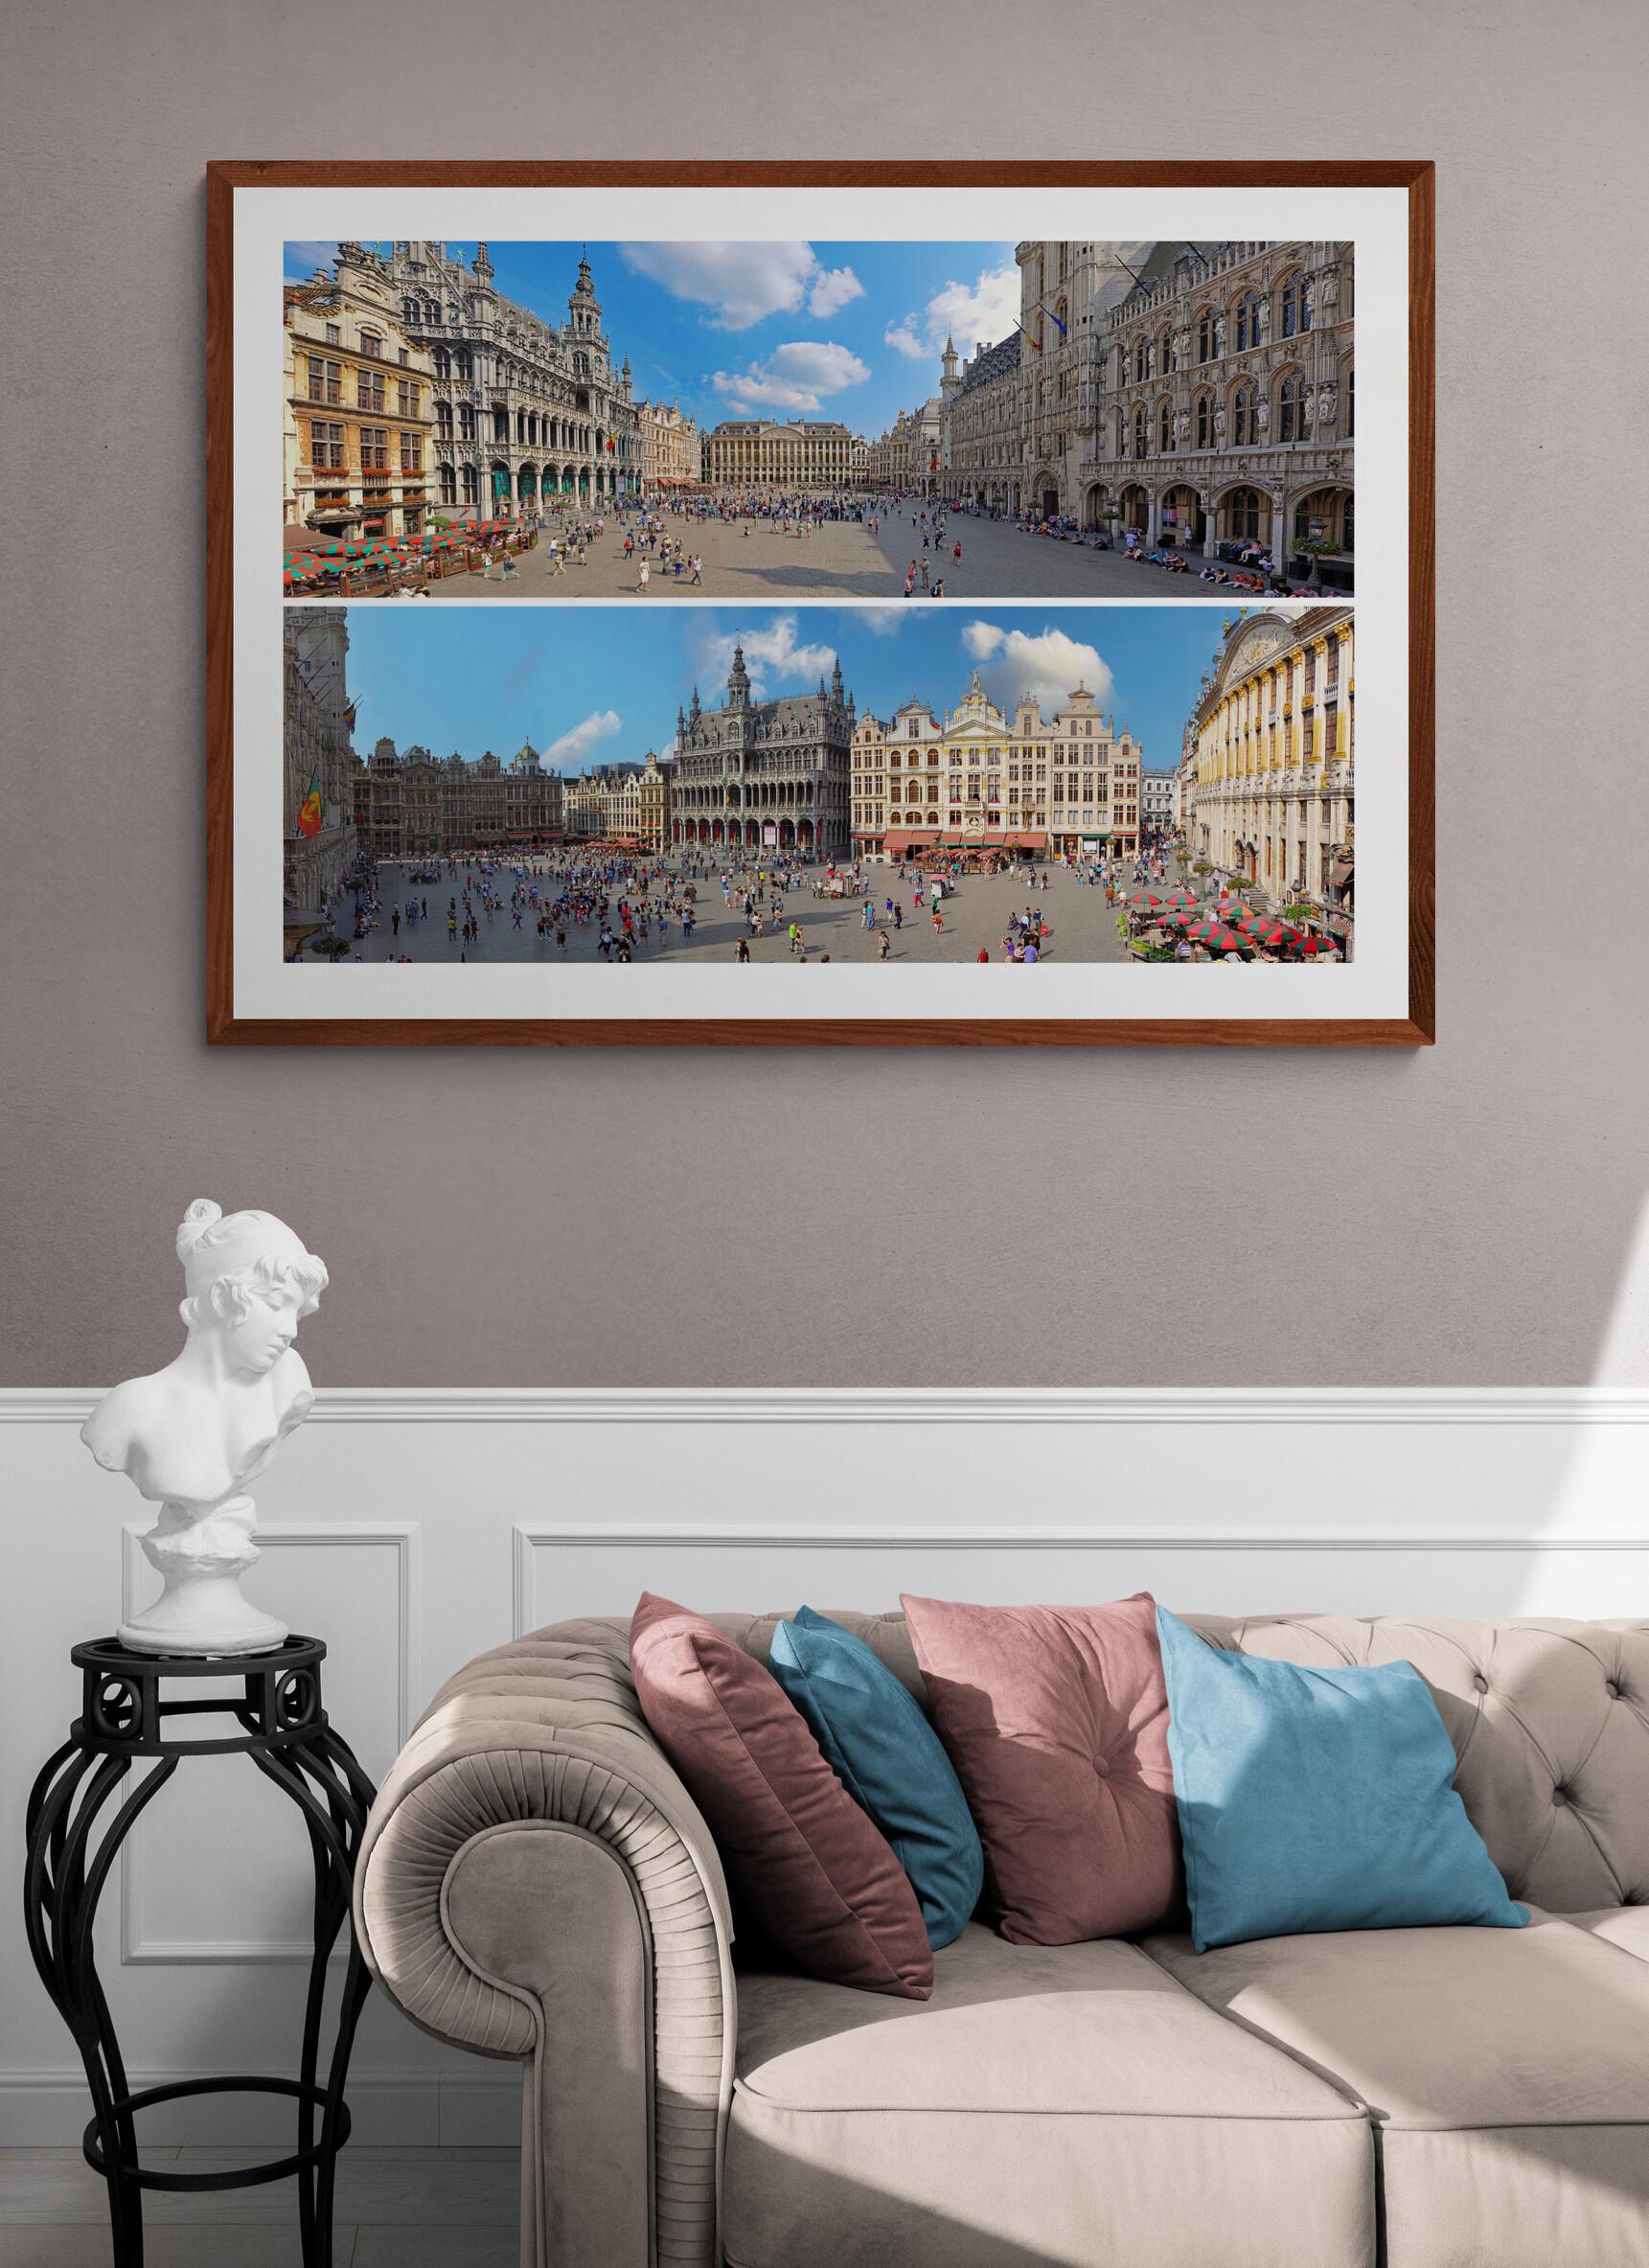 The Grand Place of Brussel - 2013 - Full Framed color panoramic photography  - Photograph by Jean Pierre De Neef